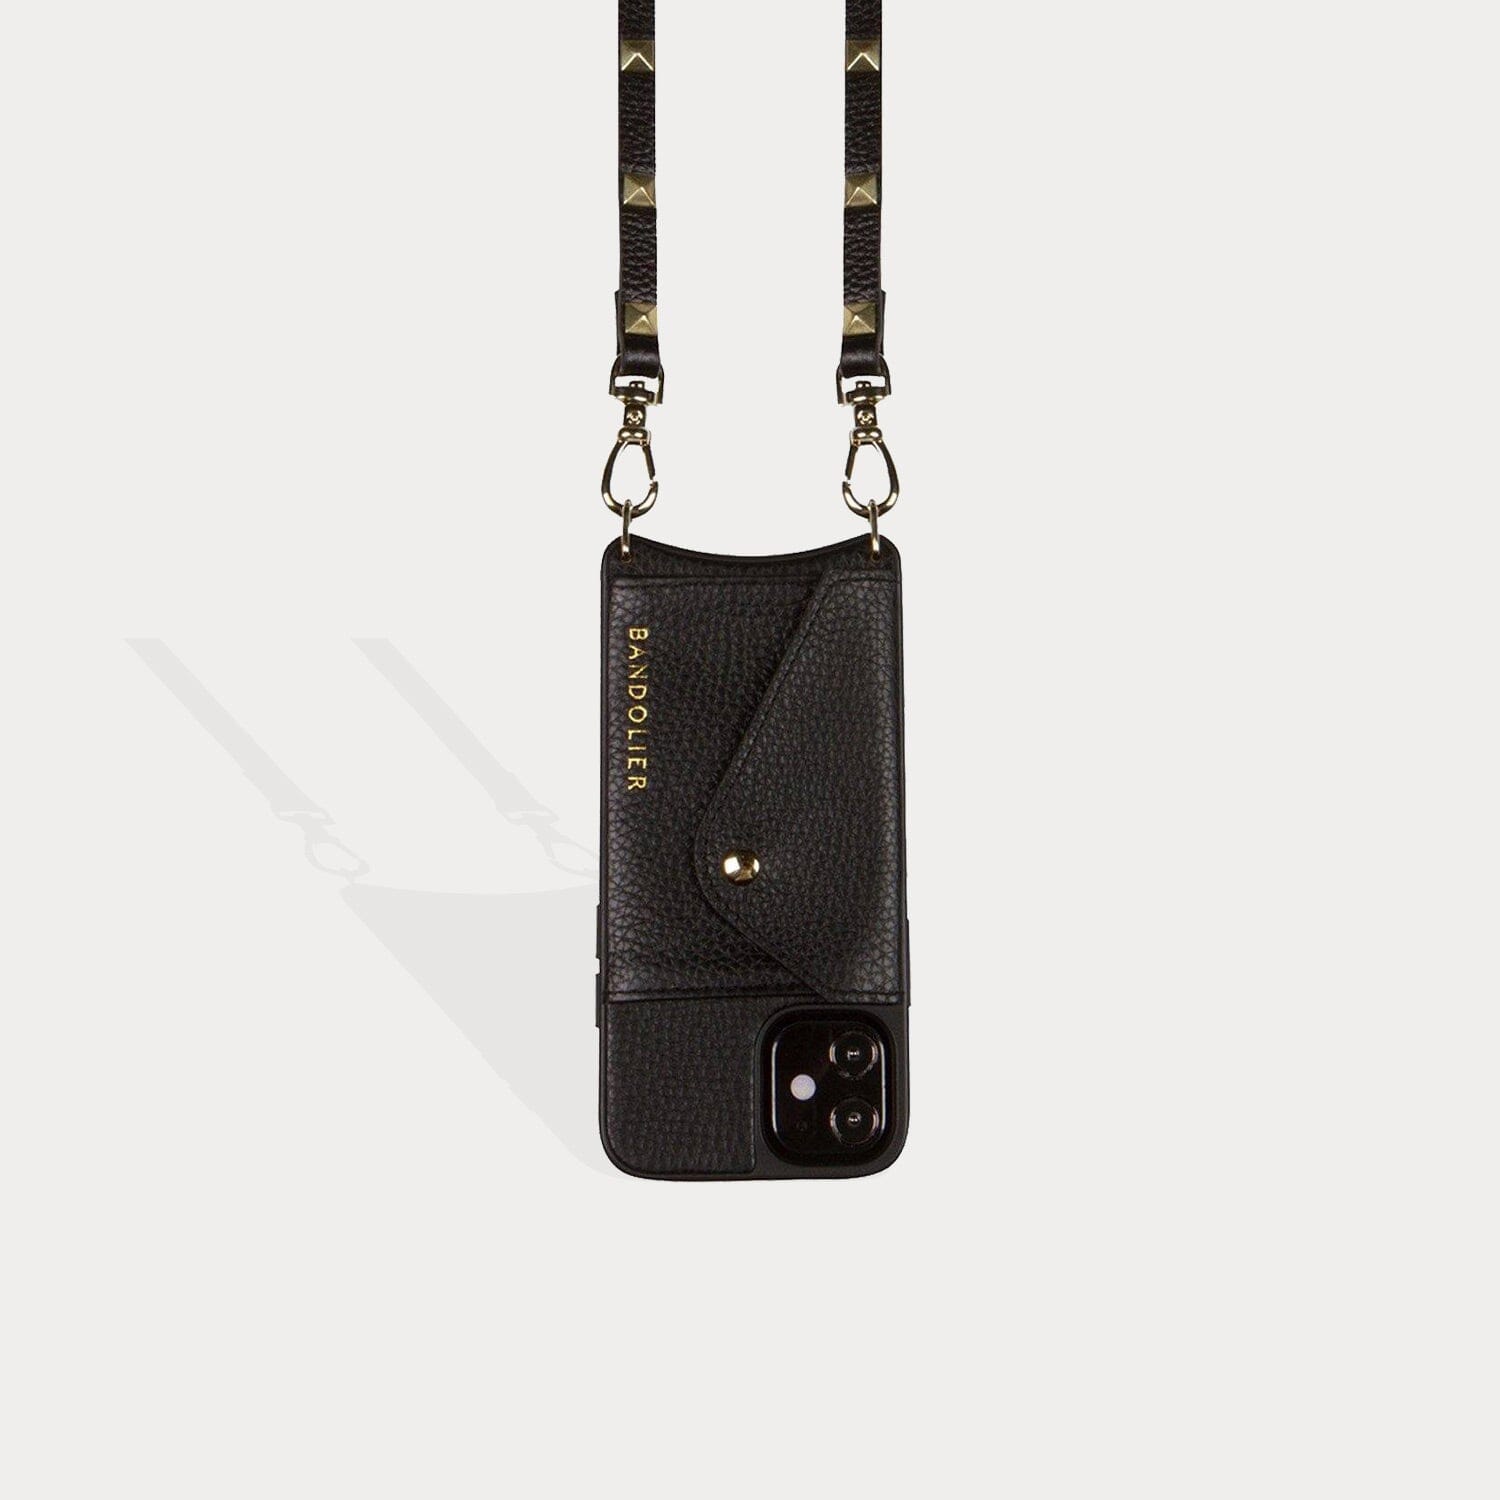 Sub Couture - Bandolier iPhone case. The crossbody case that